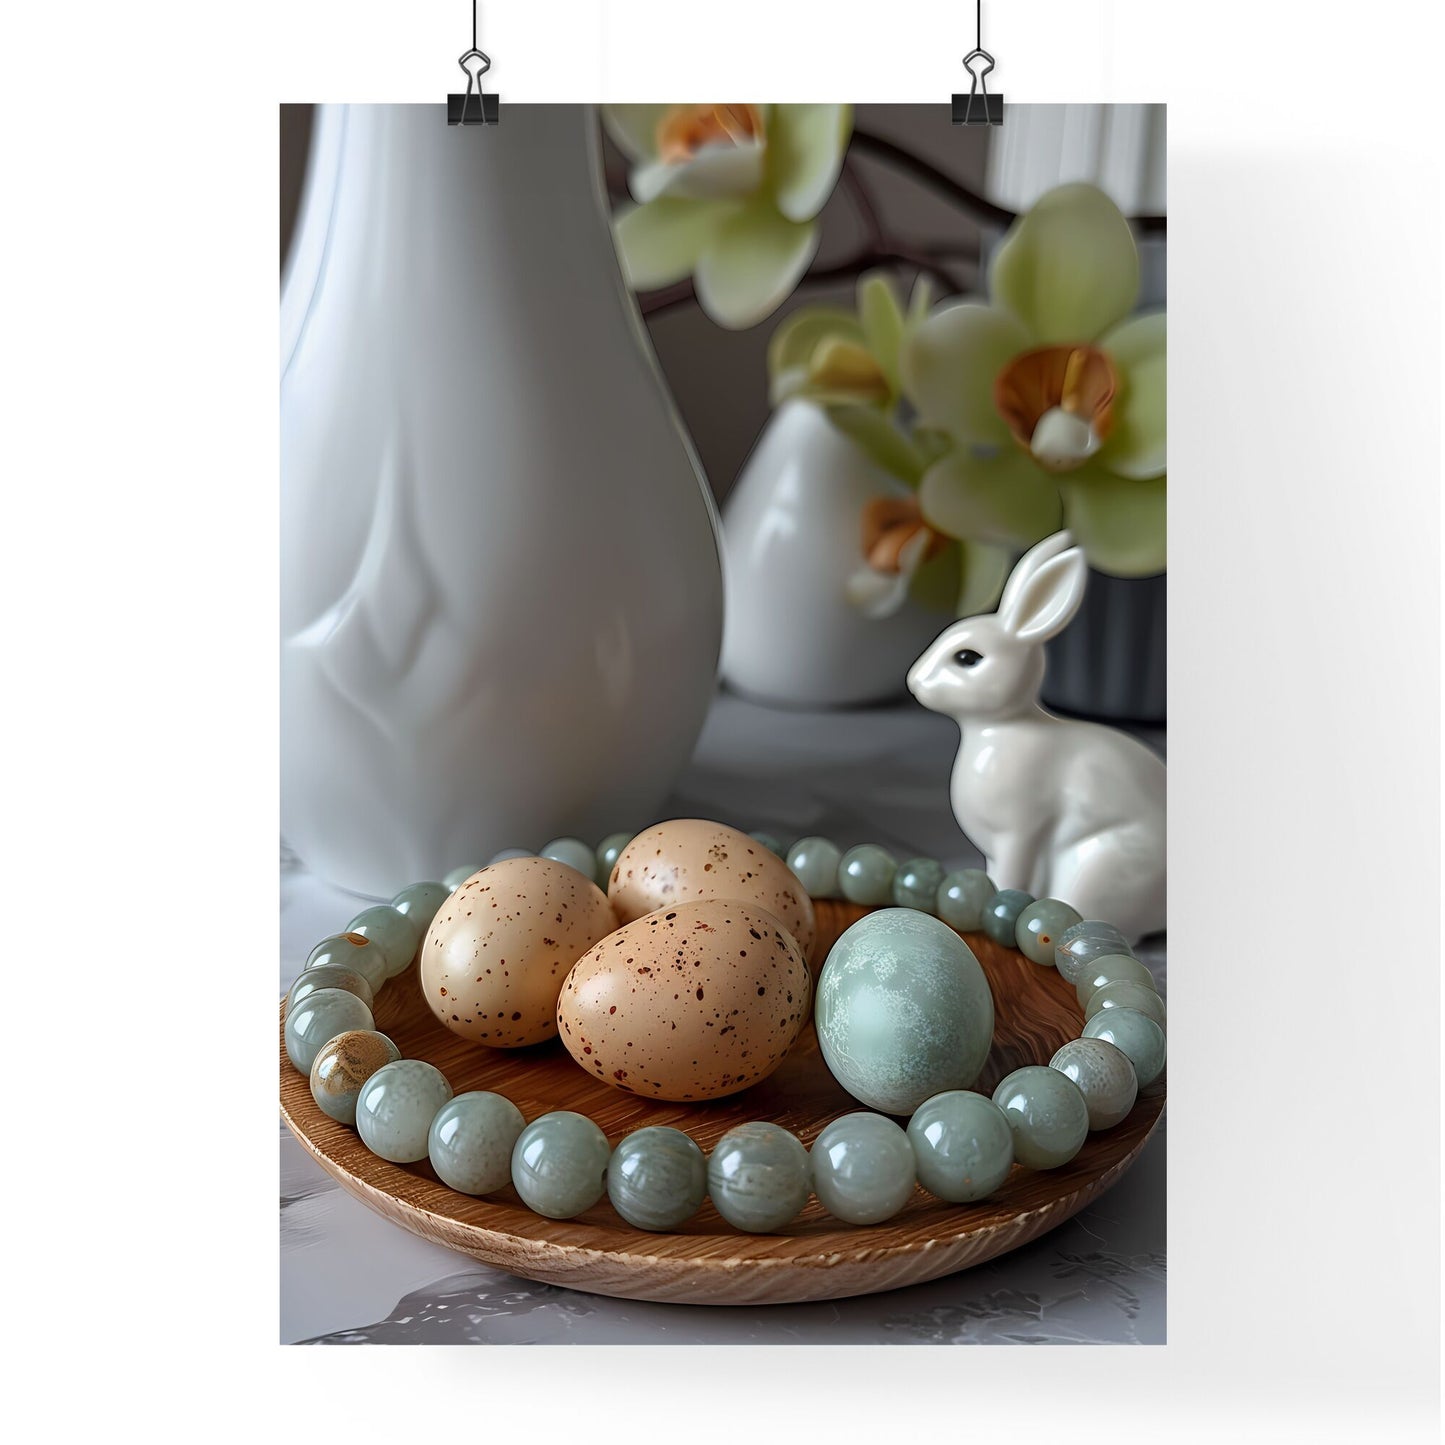 Artful Easter Still Life: Hand-Painted Bunny Figurine, Glass Bangle, Pastel Eggs Default Title